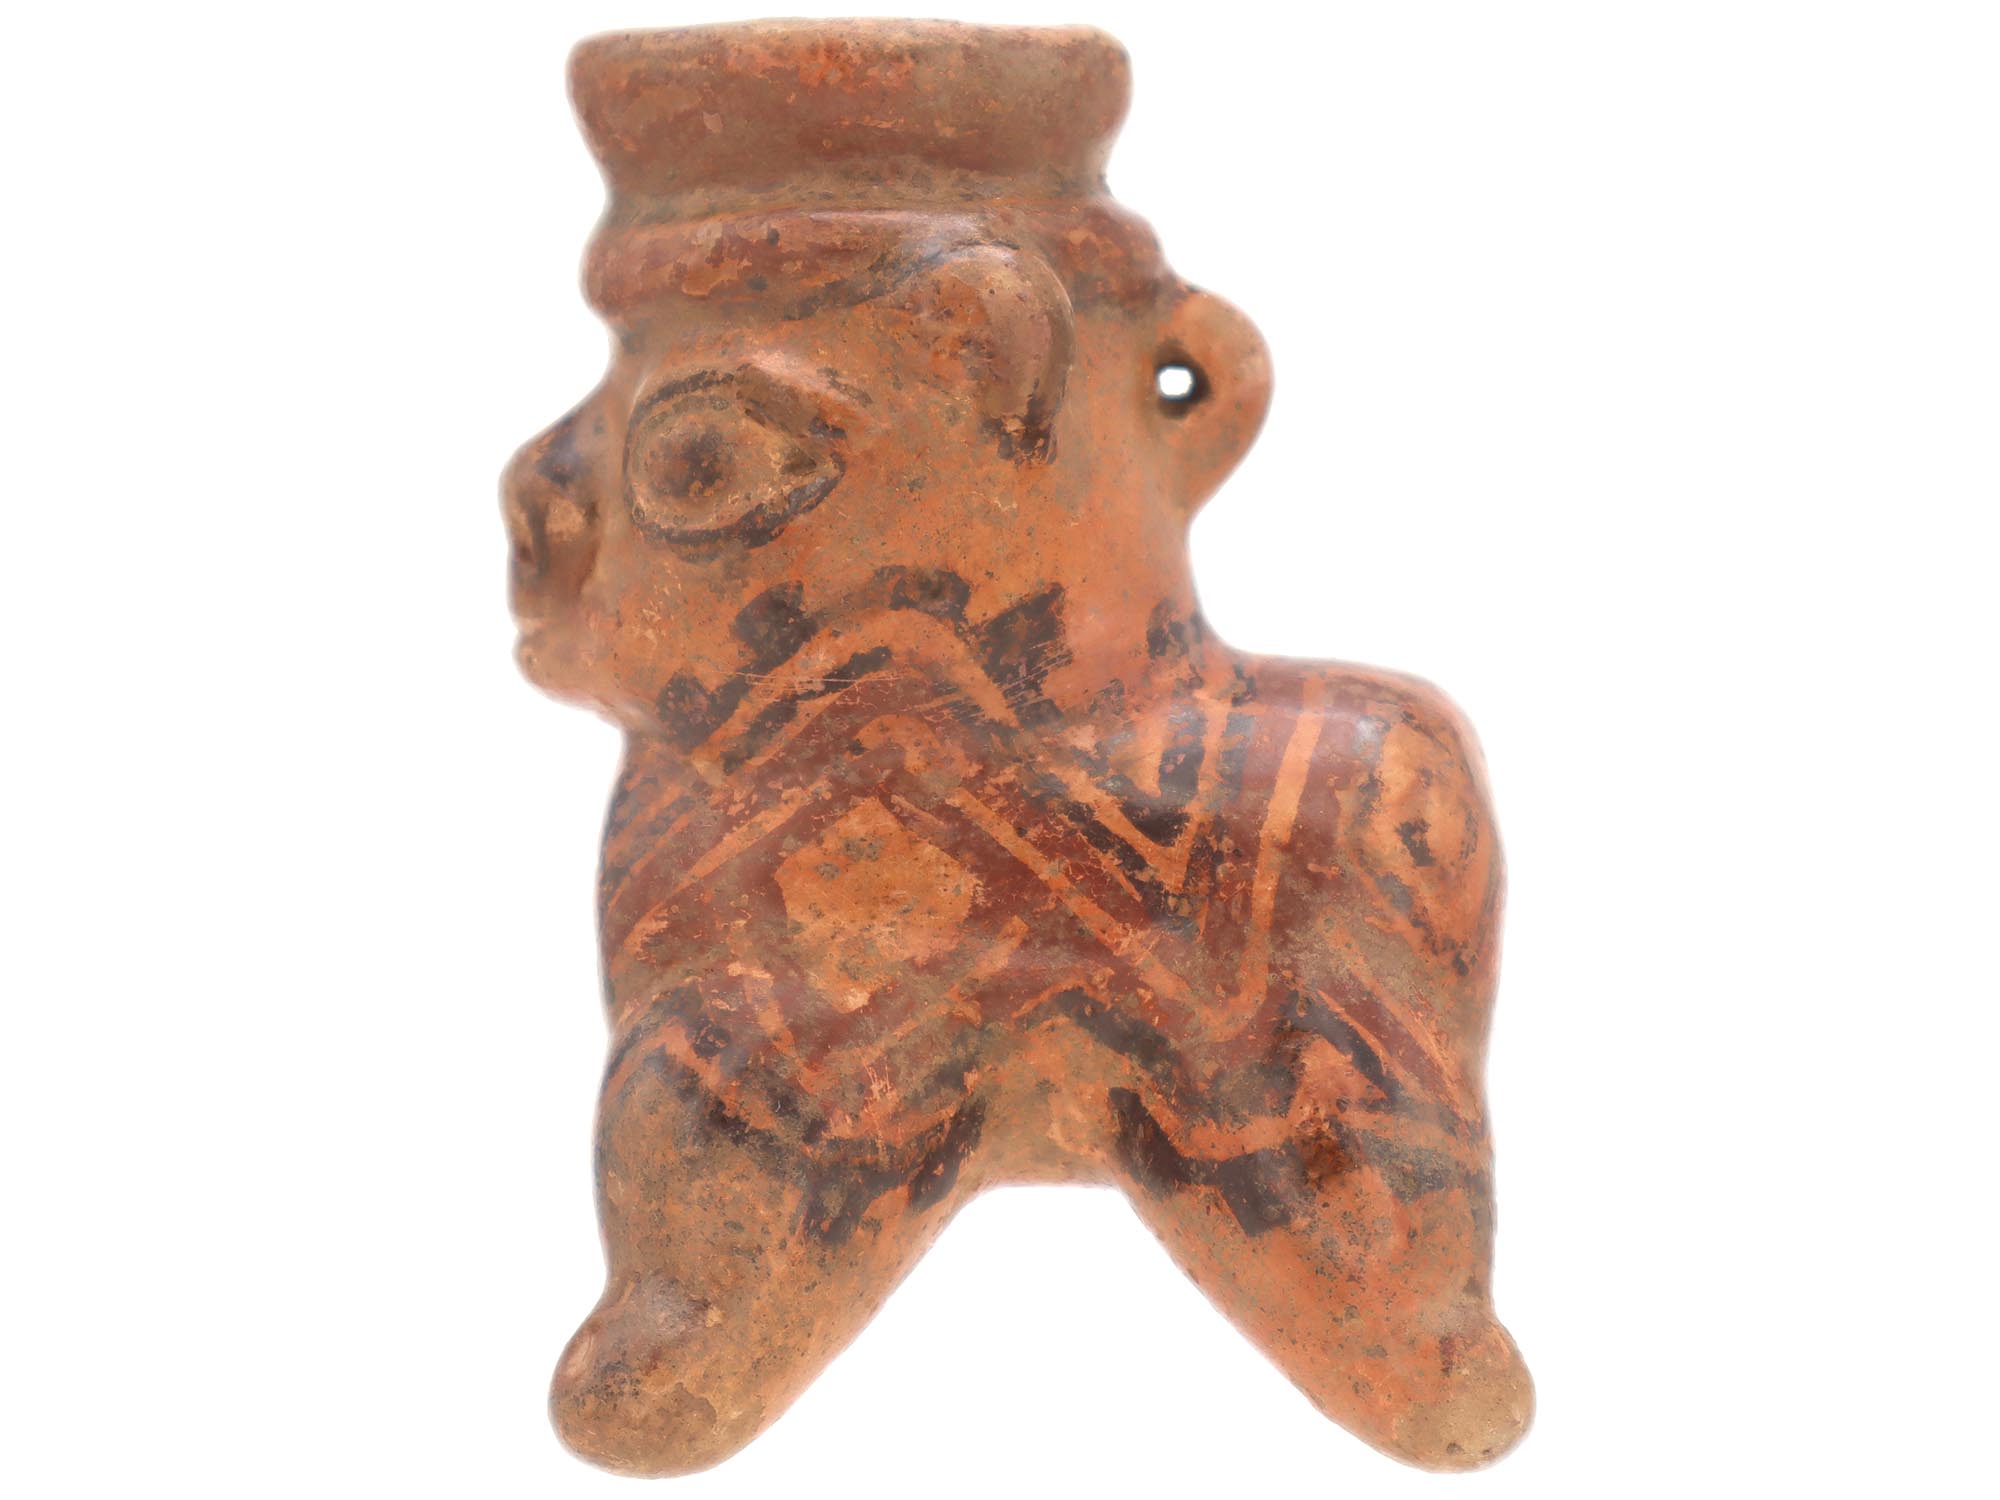 PRE COLUMBIAN COSTA RICAN MANNER EFFIGY POTTERY VESSEL PIC-7